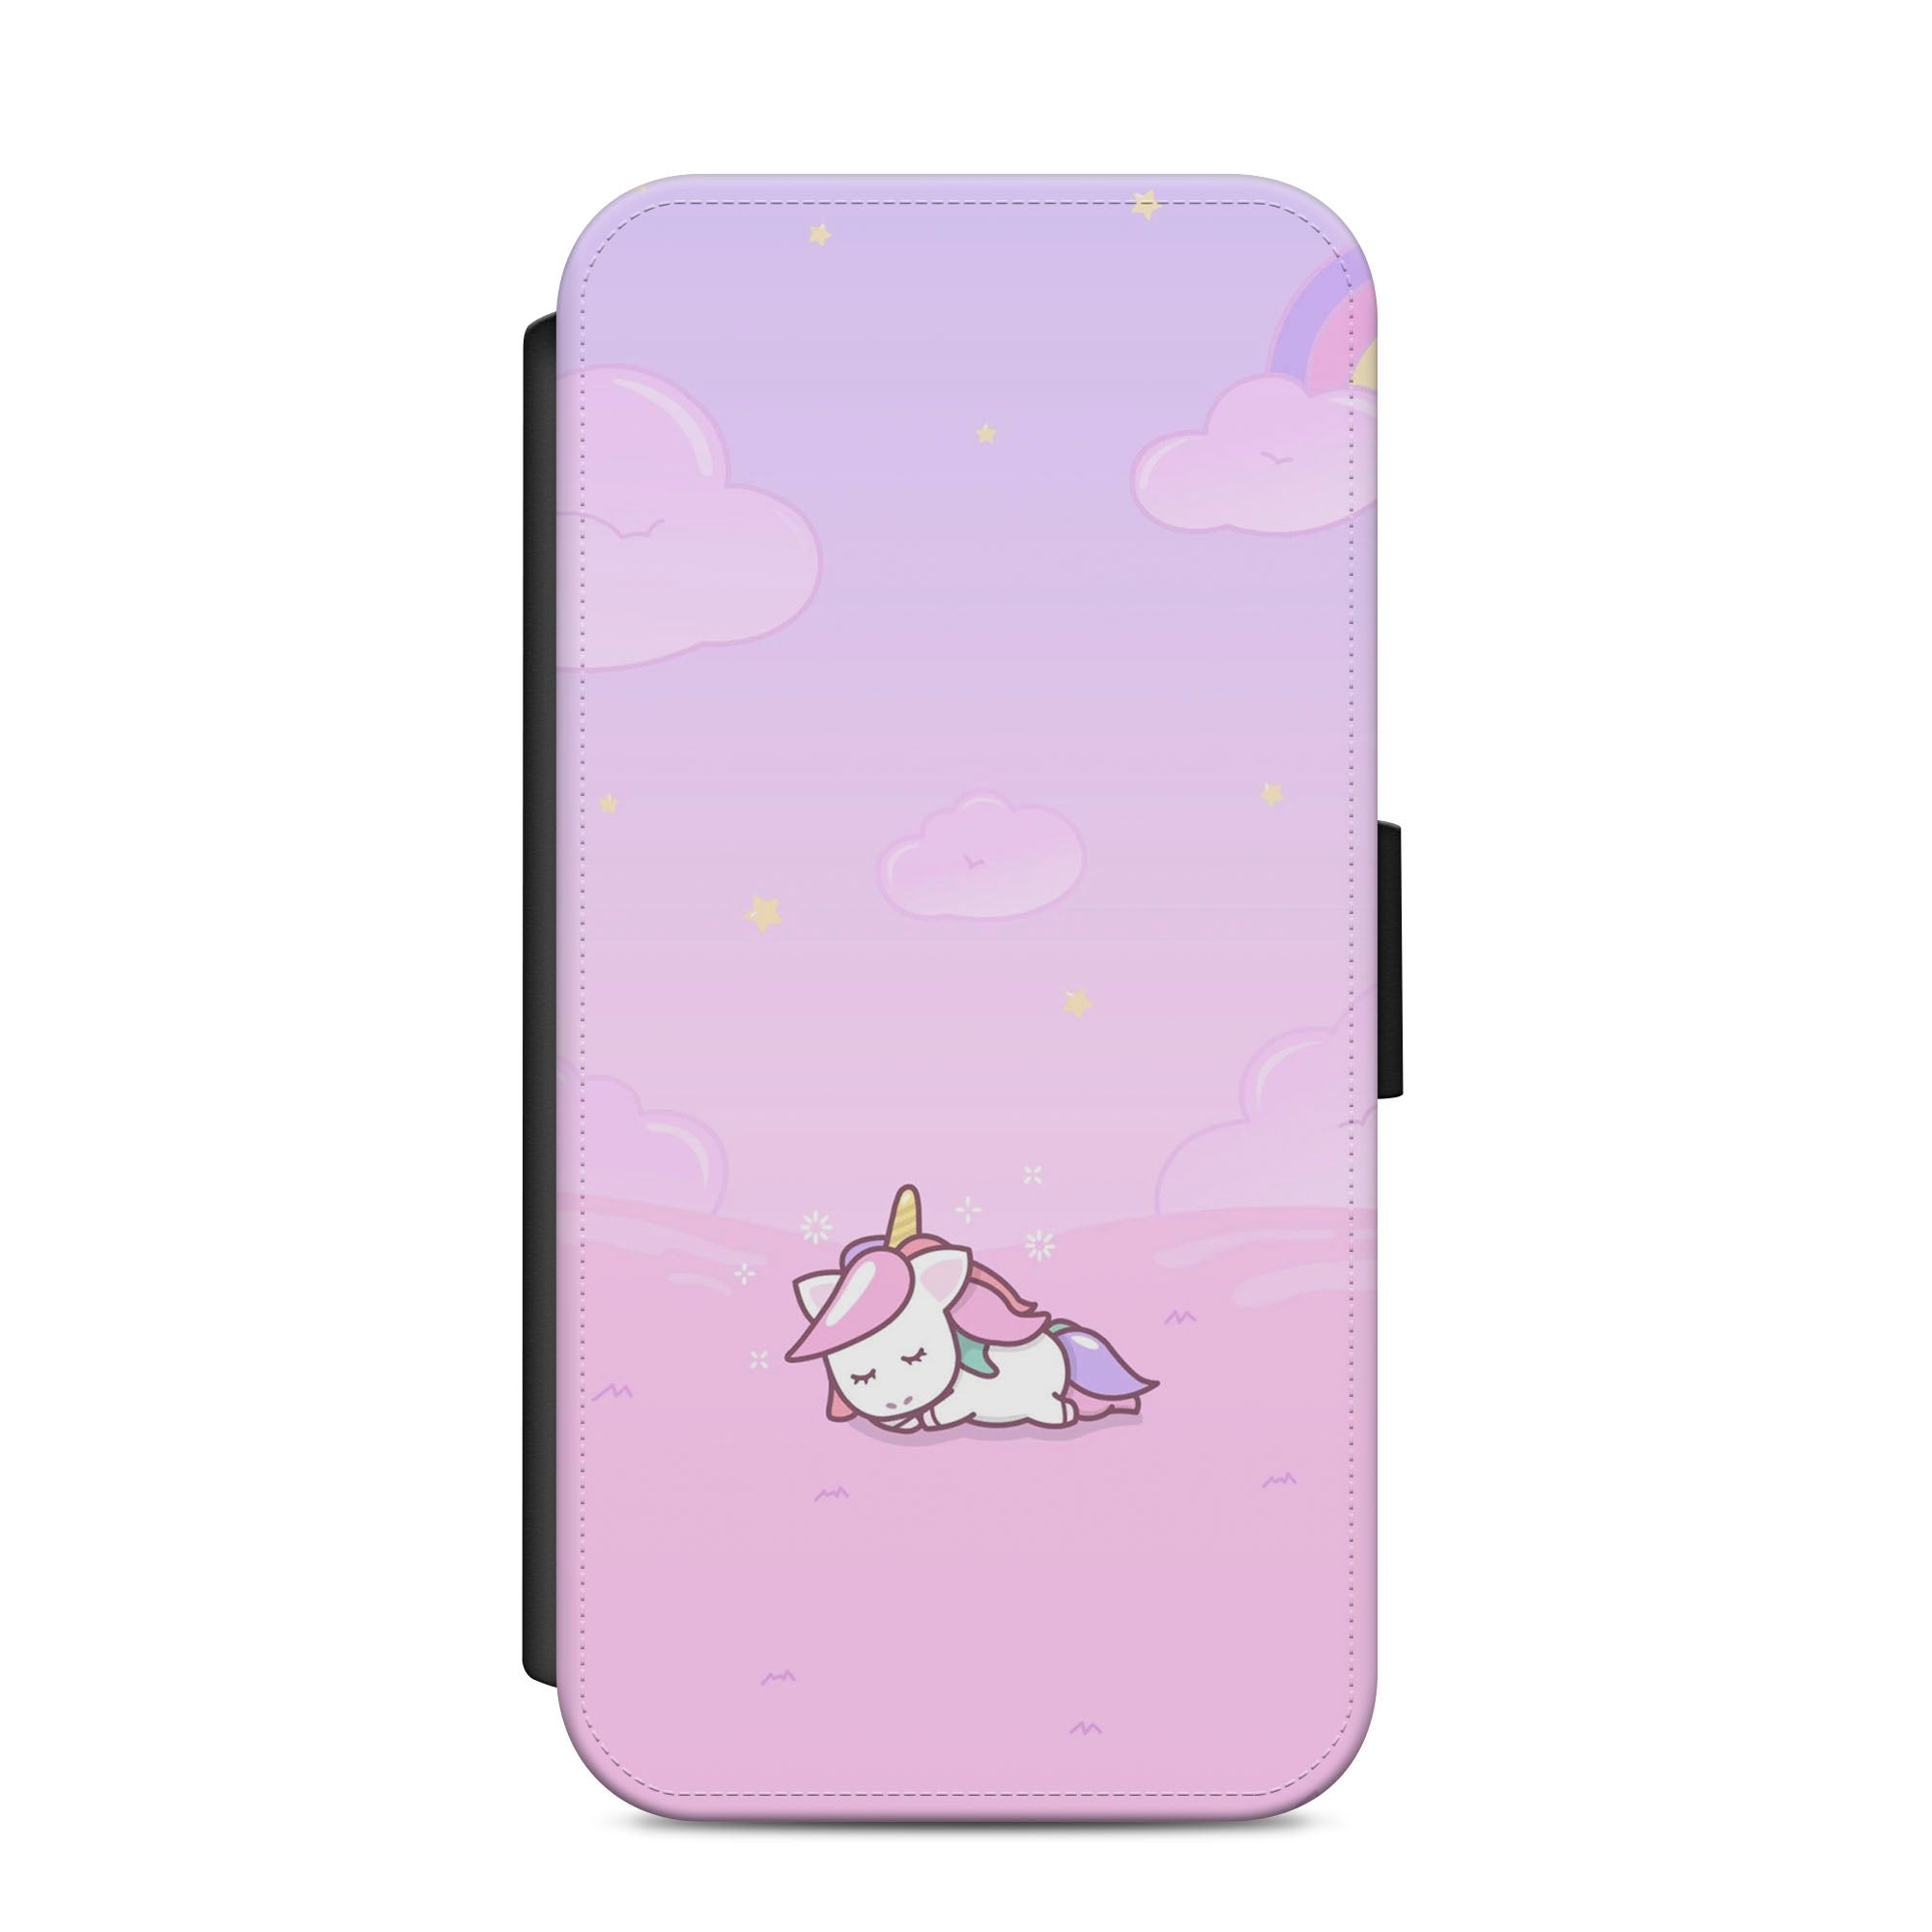 Cute Snoozing Unicorn Faux Leather Flip Case Wallet for iPhone / Samsung